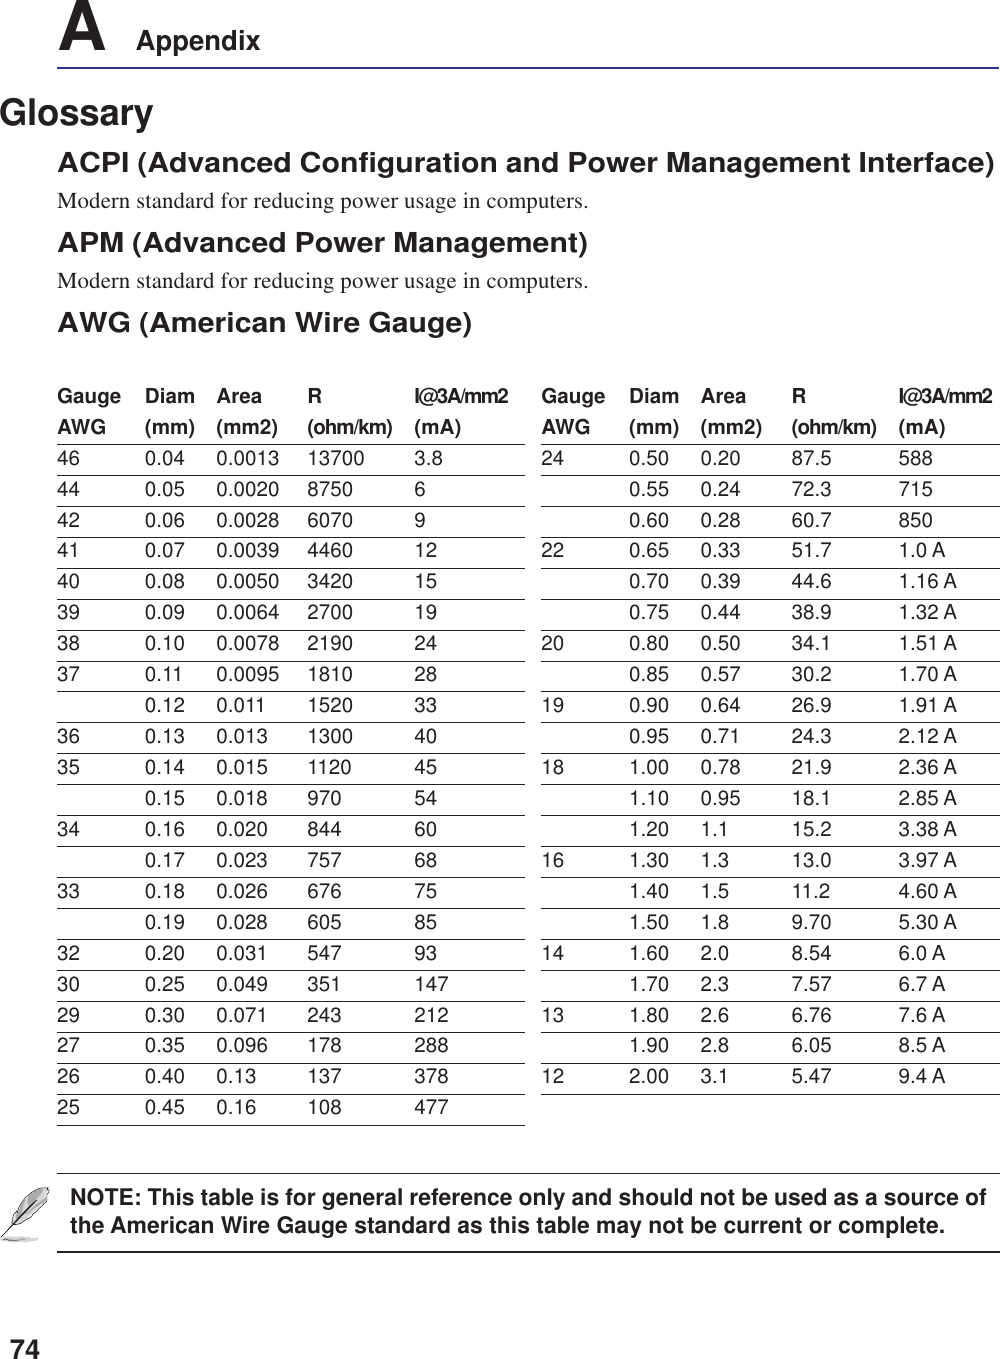 74A    AppendixGlossaryACPI (Advanced Configuration and Power Management Interface)Modern standard for reducing power usage in computers.APM (Advanced Power Management)Modern standard for reducing power usage in computers.AWG (American Wire Gauge)NOTE: This table is for general reference only and should not be used as a source ofthe American Wire Gauge standard as this table may not be current or complete.Gauge Diam Area R I@3A/mm2AWG (mm) (mm2) (ohm/km) (mA)46 0.04 0.0013 13700 3.844 0.05 0.0020 8750 642 0.06 0.0028 6070 941 0.07 0.0039 4460 1240 0.08 0.0050 3420 1539 0.09 0.0064 2700 1938 0.10 0.0078 2190 2437 0.11 0.0095 1810 280.12 0.011 1520 3336 0.13 0.013 1300 4035 0.14 0.015 1120 450.15 0.018 970 5434 0.16 0.020 844 600.17 0.023 757 6833 0.18 0.026 676 750.19 0.028 605 8532 0.20 0.031 547 9330 0.25 0.049 351 14729 0.30 0.071 243 21227 0.35 0.096 178 28826 0.40 0.13 137 37825 0.45 0.16 108 477Gauge Diam Area R I@3A/mm2AWG (mm) (mm2) (ohm/km) (mA)24 0.50 0.20 87.5 5880.55 0.24 72.3 7150.60 0.28 60.7 85022 0.65 0.33 51.7 1.0 A0.70 0.39 44.6 1.16 A0.75 0.44 38.9 1.32 A20 0.80 0.50 34.1 1.51 A0.85 0.57 30.2 1.70 A19 0.90 0.64 26.9 1.91 A0.95 0.71 24.3 2.12 A18 1.00 0.78 21.9 2.36 A1.10 0.95 18.1 2.85 A1.20 1.1 15.2 3.38 A16 1.30 1.3 13.0 3.97 A1.40 1.5 11.2 4.60 A1.50 1.8 9.70 5.30 A14 1.60 2.0 8.54 6.0 A1.70 2.3 7.57 6.7 A13 1.80 2.6 6.76 7.6 A1.90 2.8 6.05 8.5 A12 2.00 3.1 5.47 9.4 A